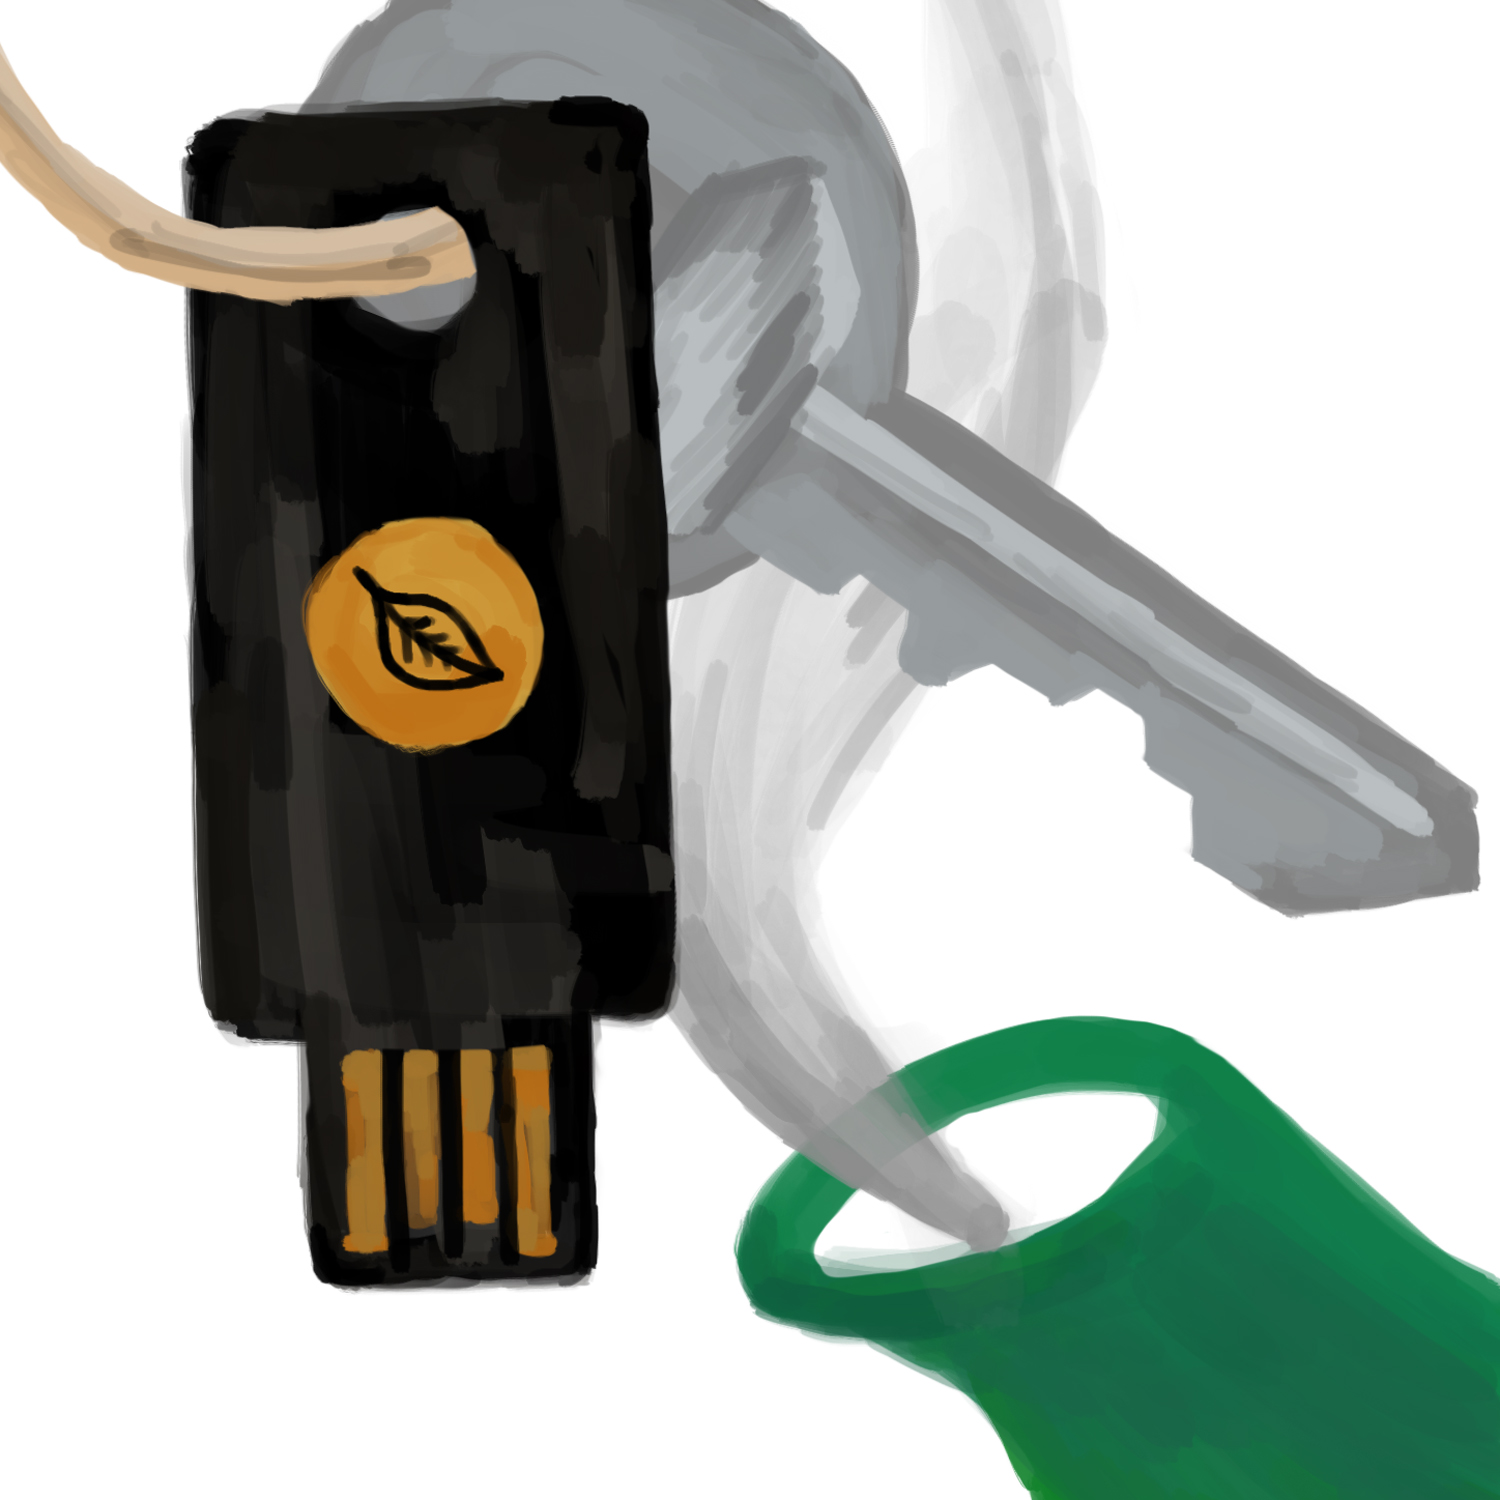 Two-factor authentication and account recovery episode art